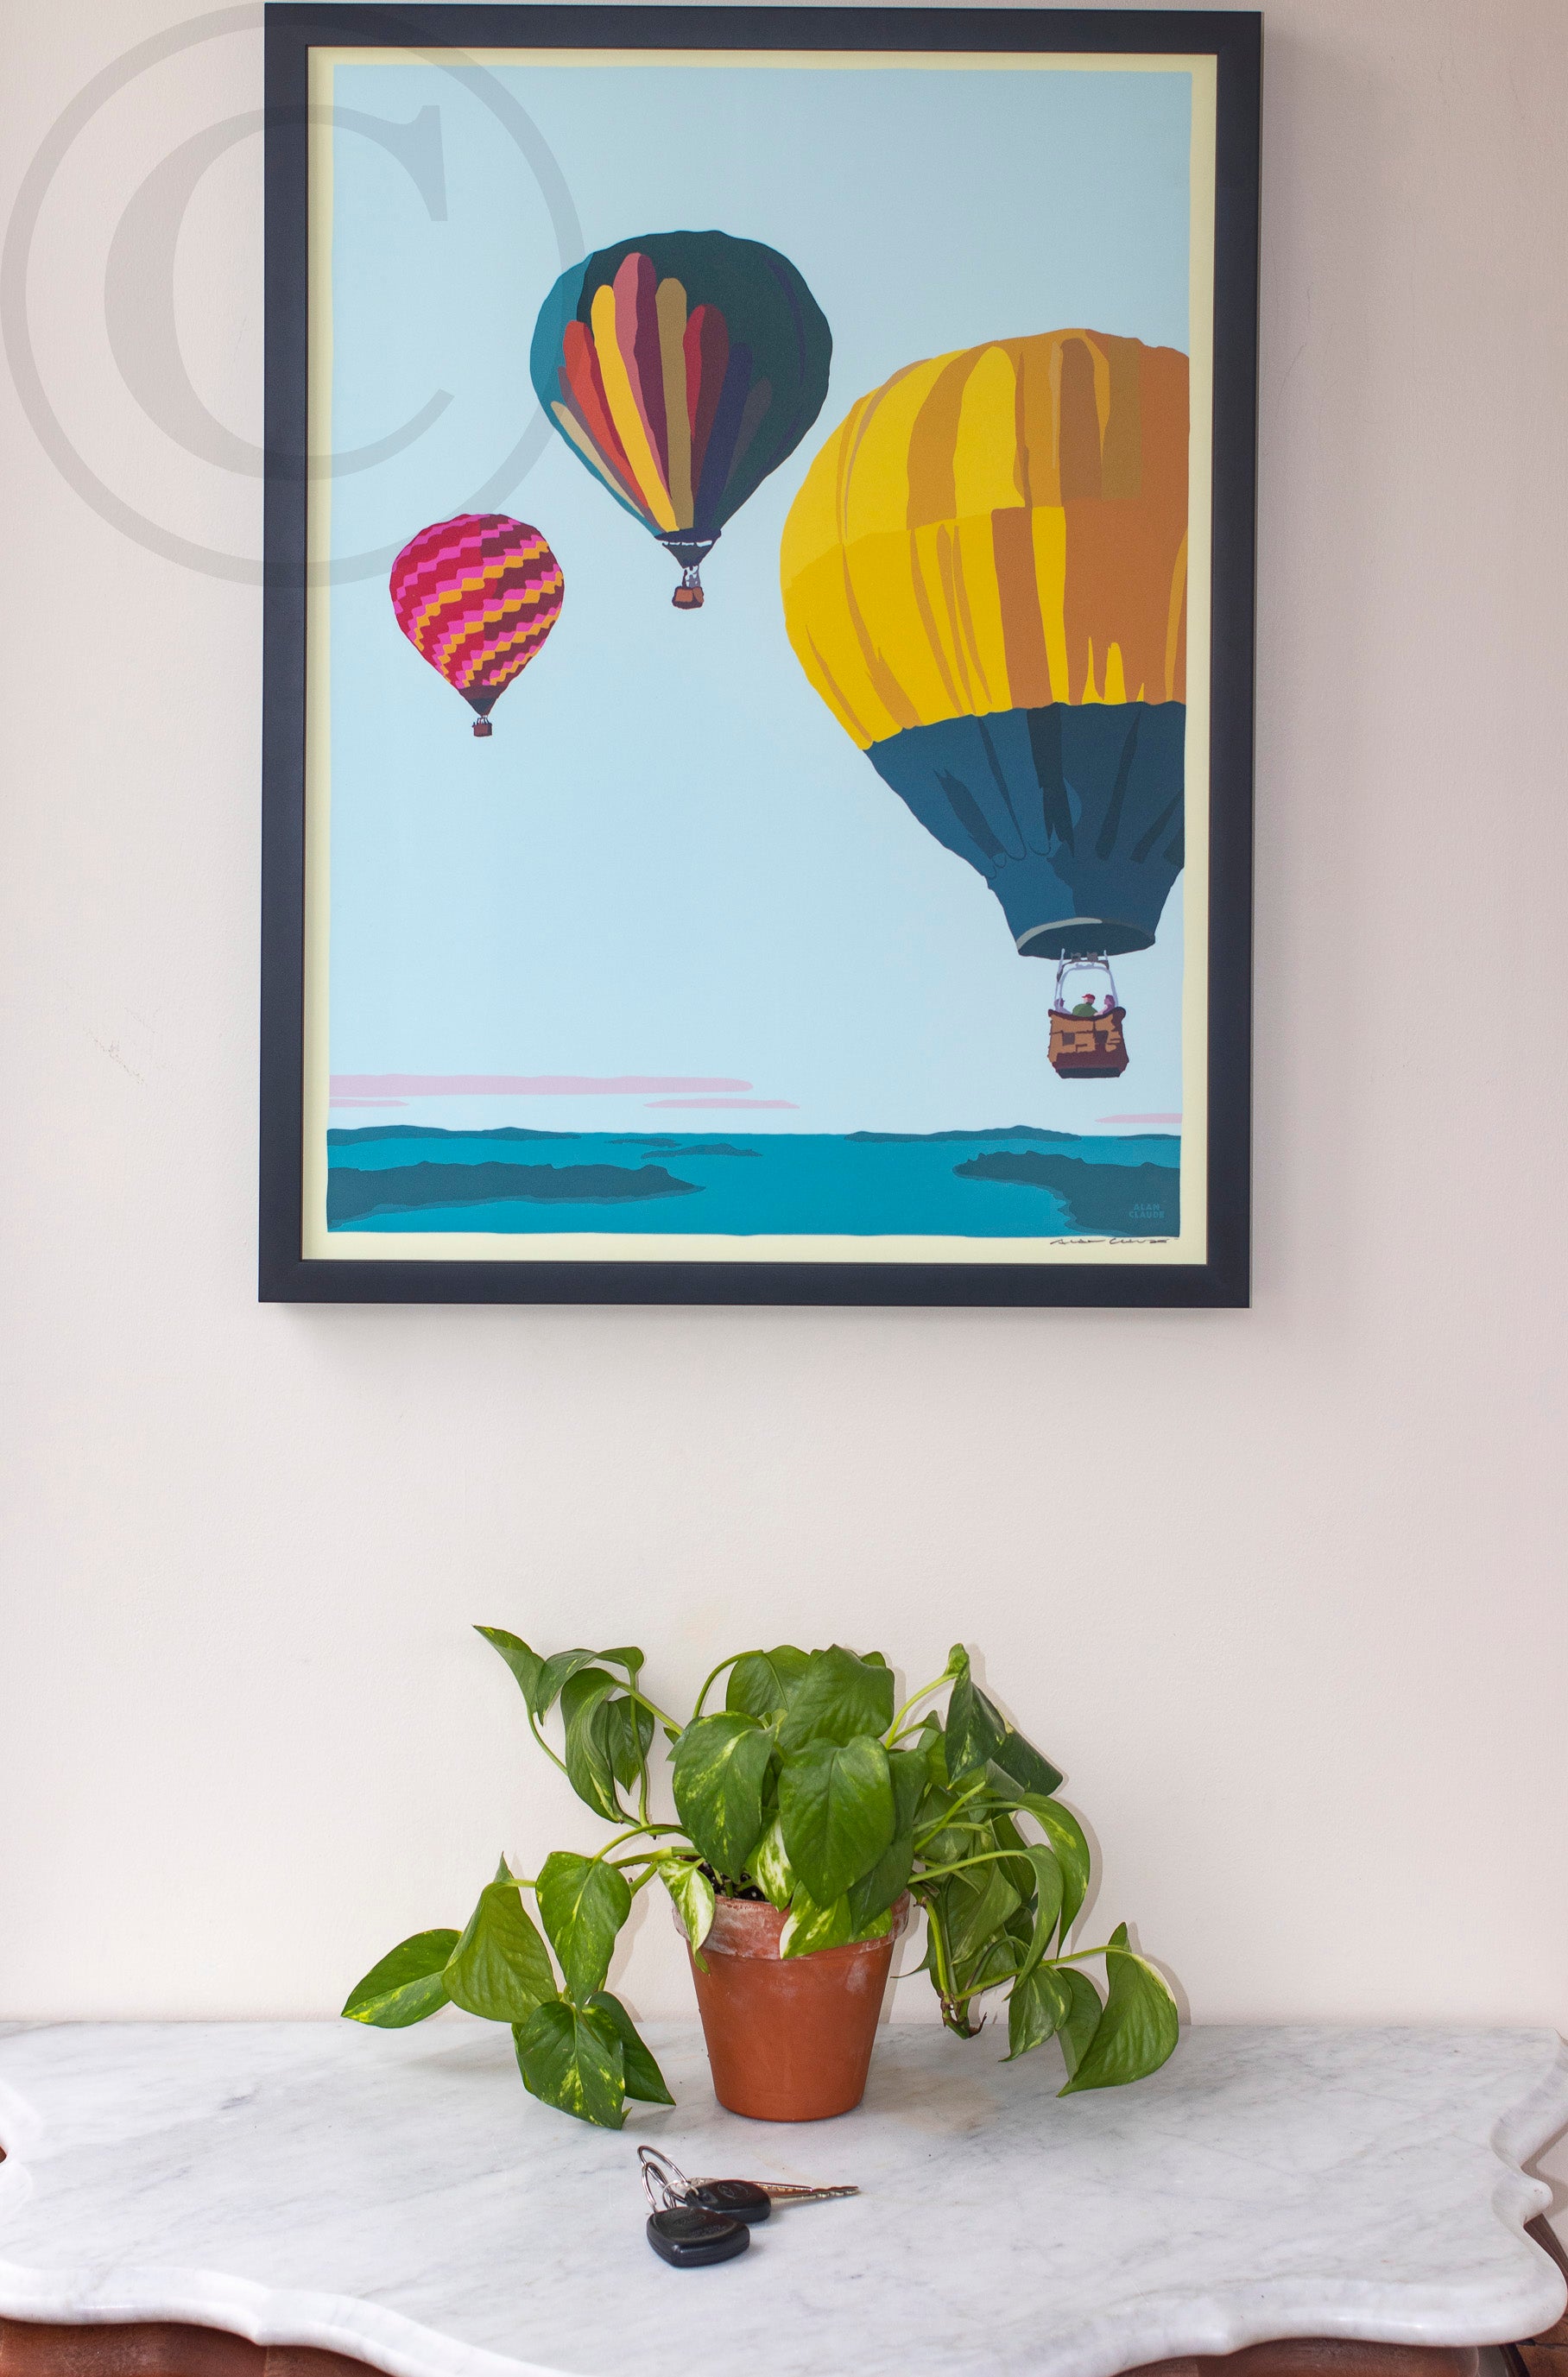 Balloons Over Islands Art Print 18" x 24" Framed Wall Poster By Alan Claude - Maine